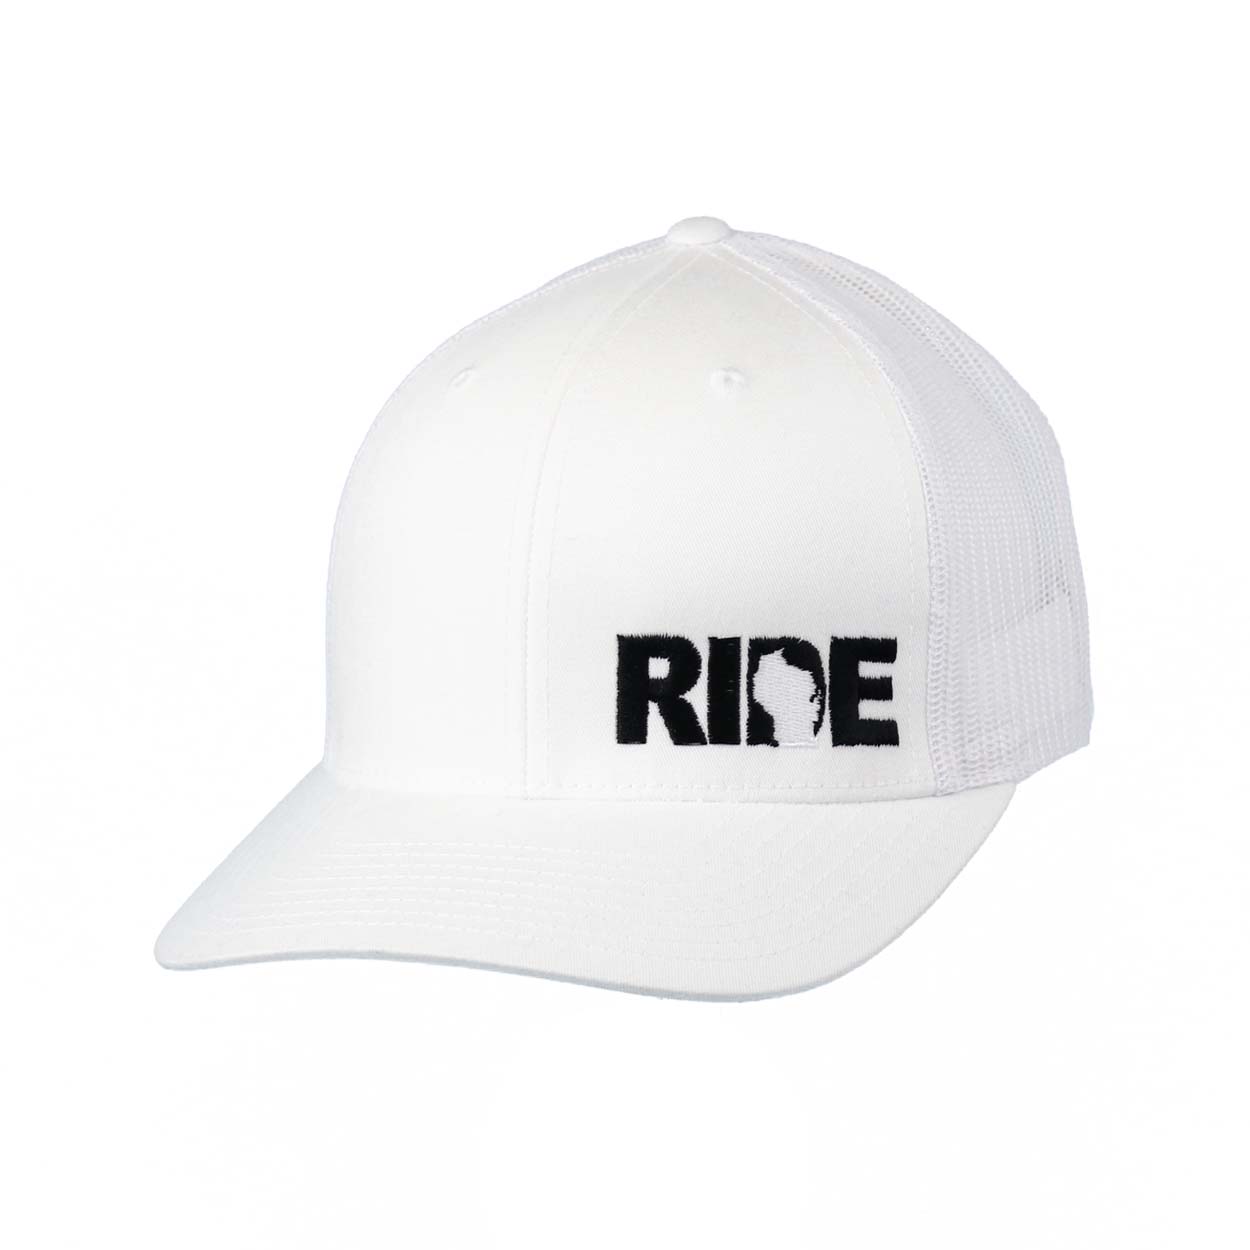 Ride Wisconsin Night Out Embroidered Snapback Trucker Hat White/Black